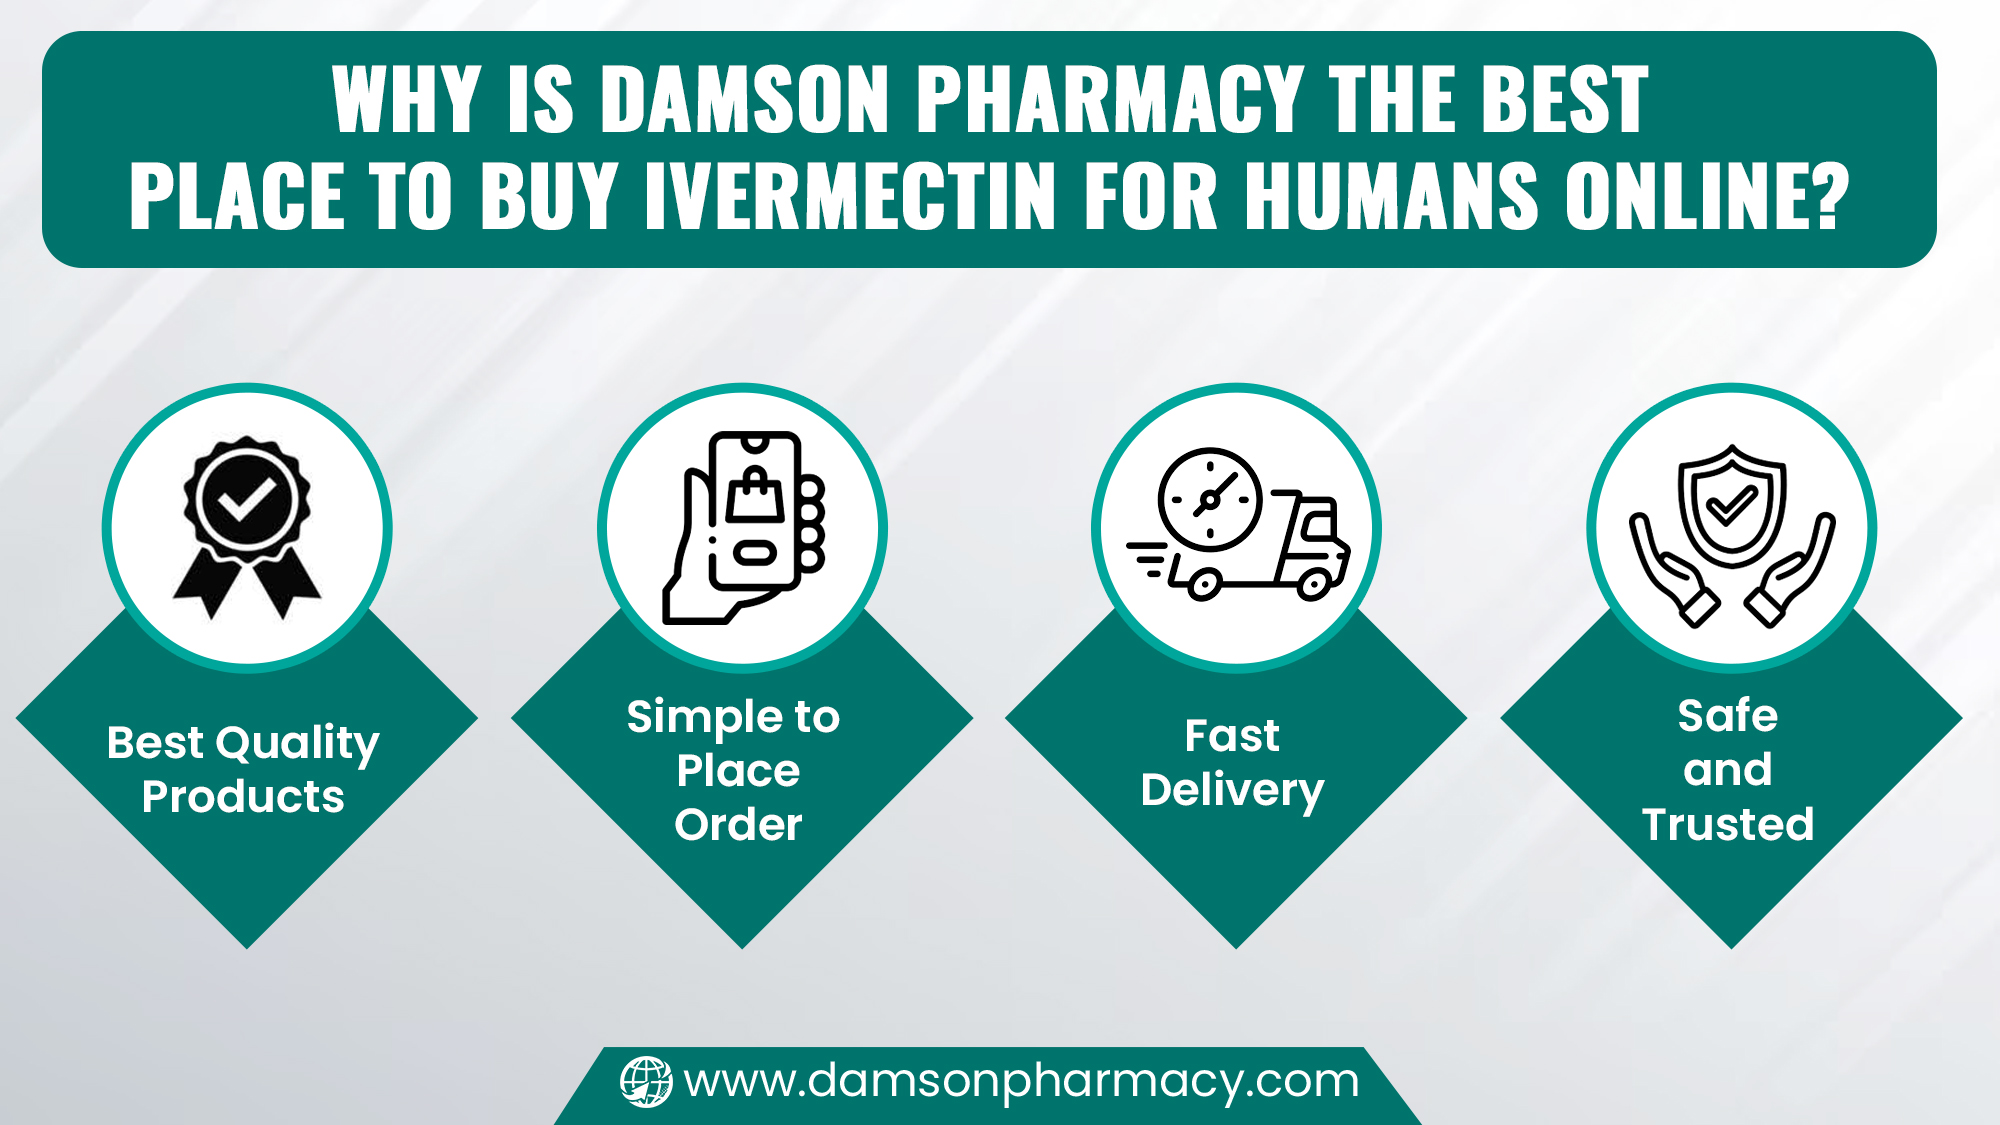 Why is Damson Pharmacy the best place to buy Ivermectin for Humans Online